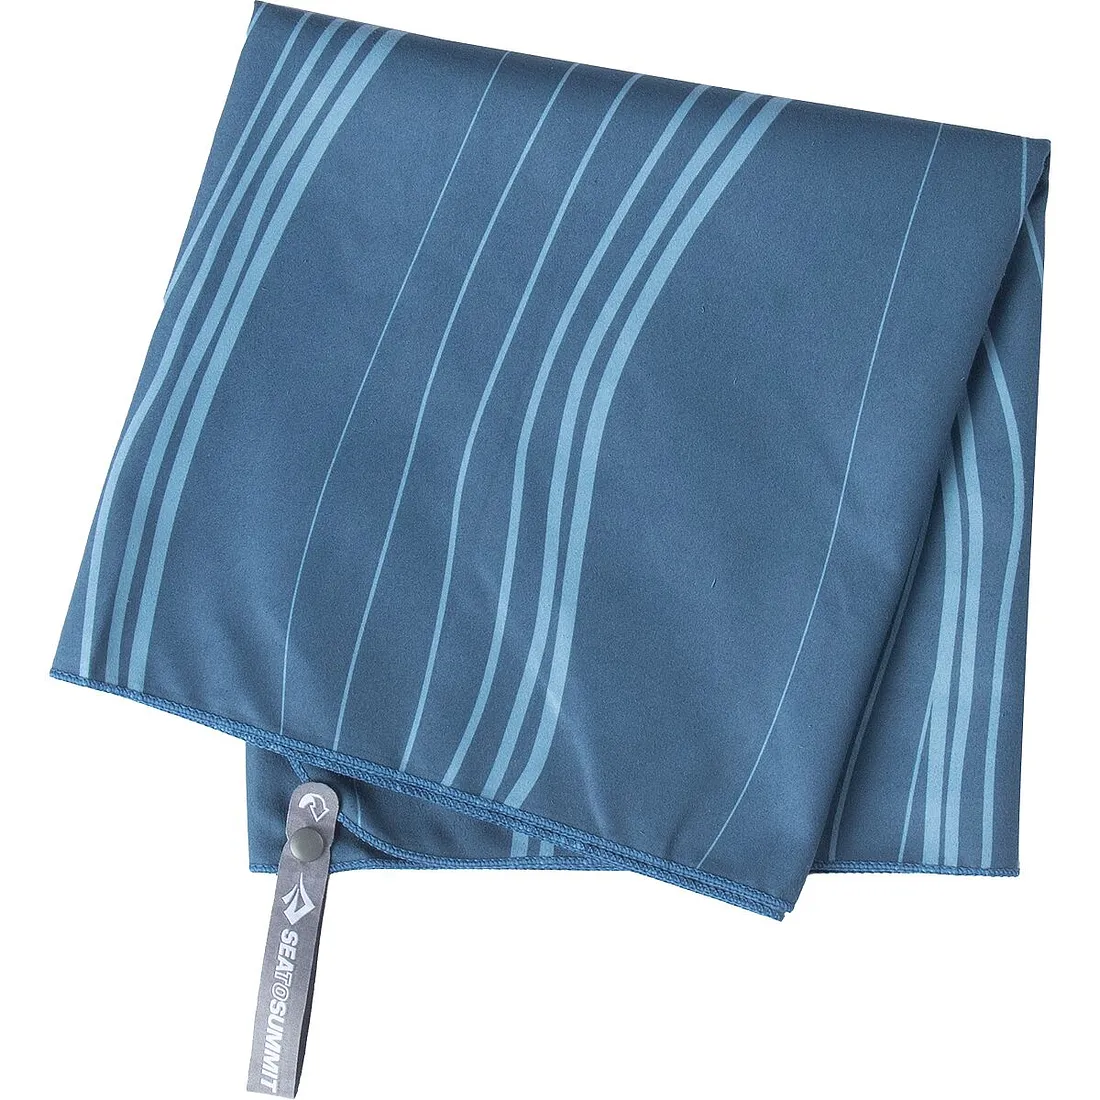 Sea to Summit DryLite Camping Towel